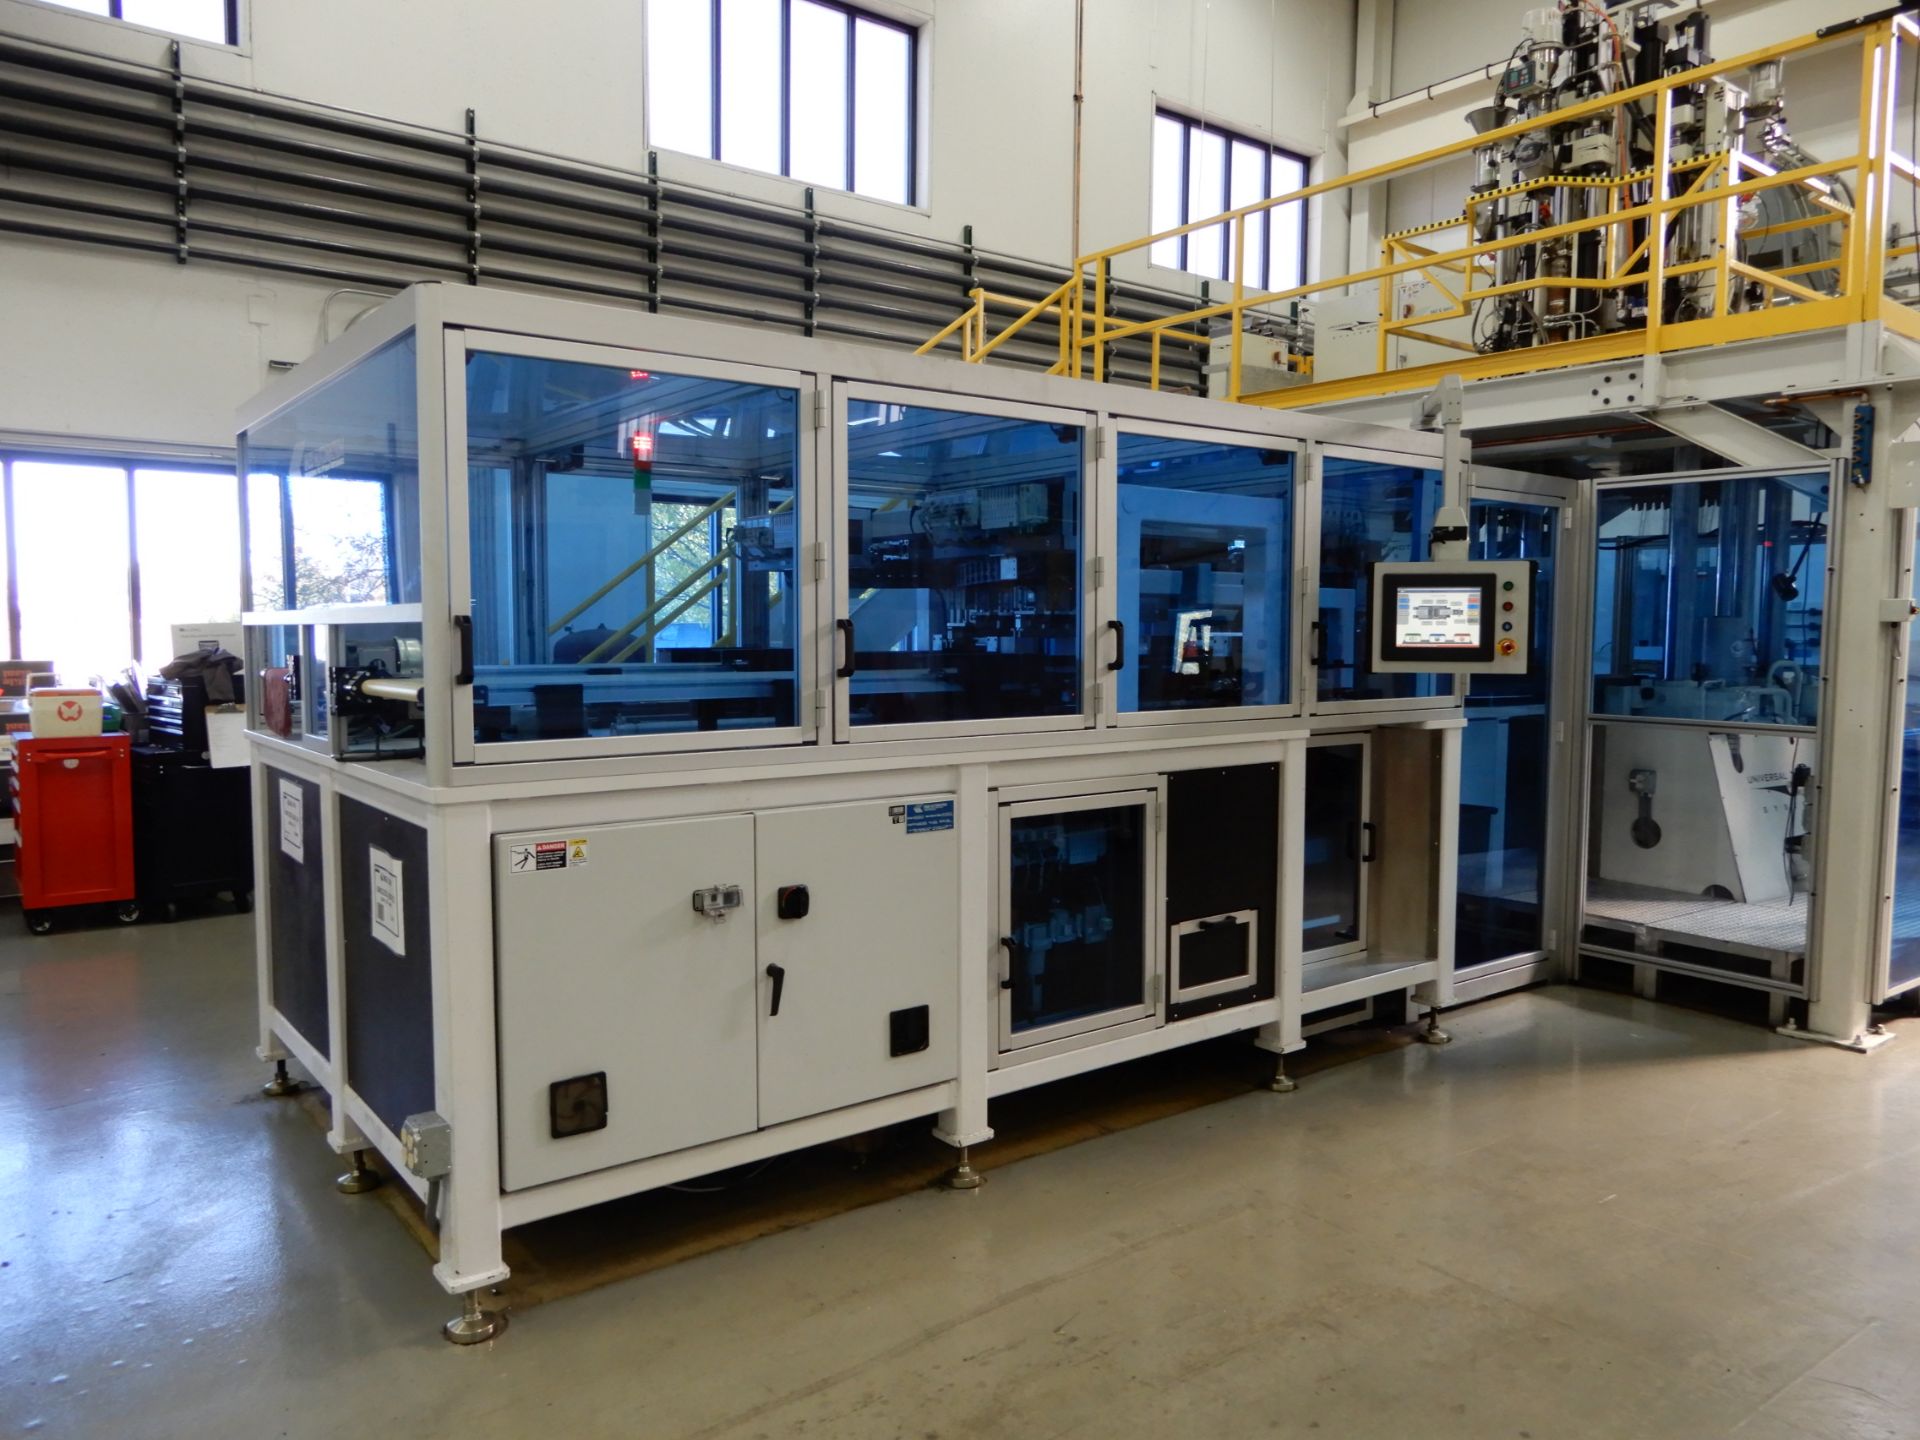 NEFF 200 Ton 4-Post Down Acting Hydraulic Press (Vertical Injection molding system) - Image 47 of 62